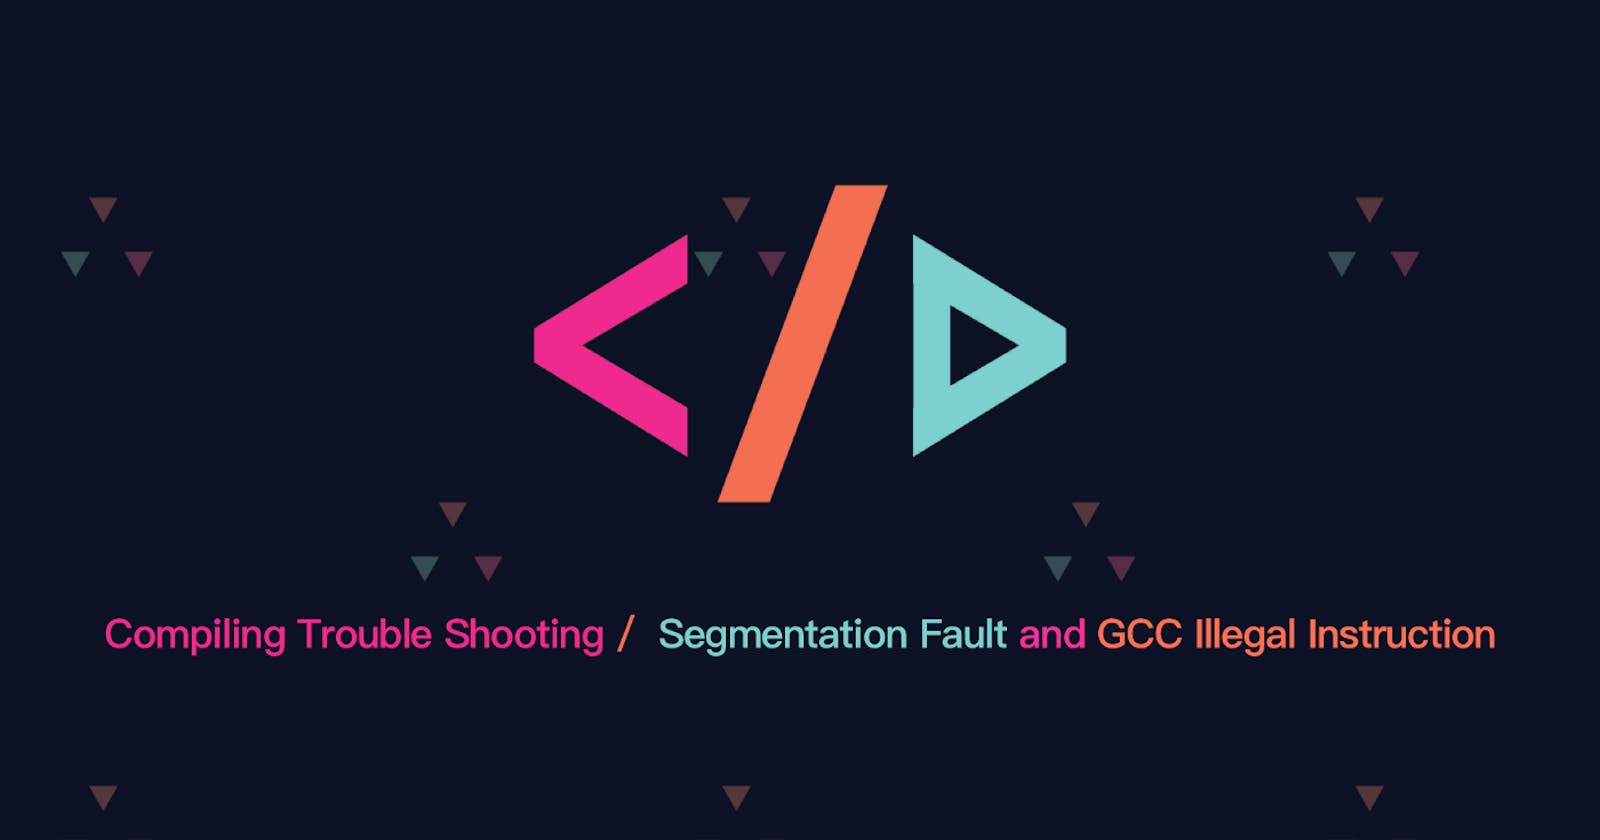 Compiling Trouble Shooting: Segmentation Fault and GCC Illegal Instruction